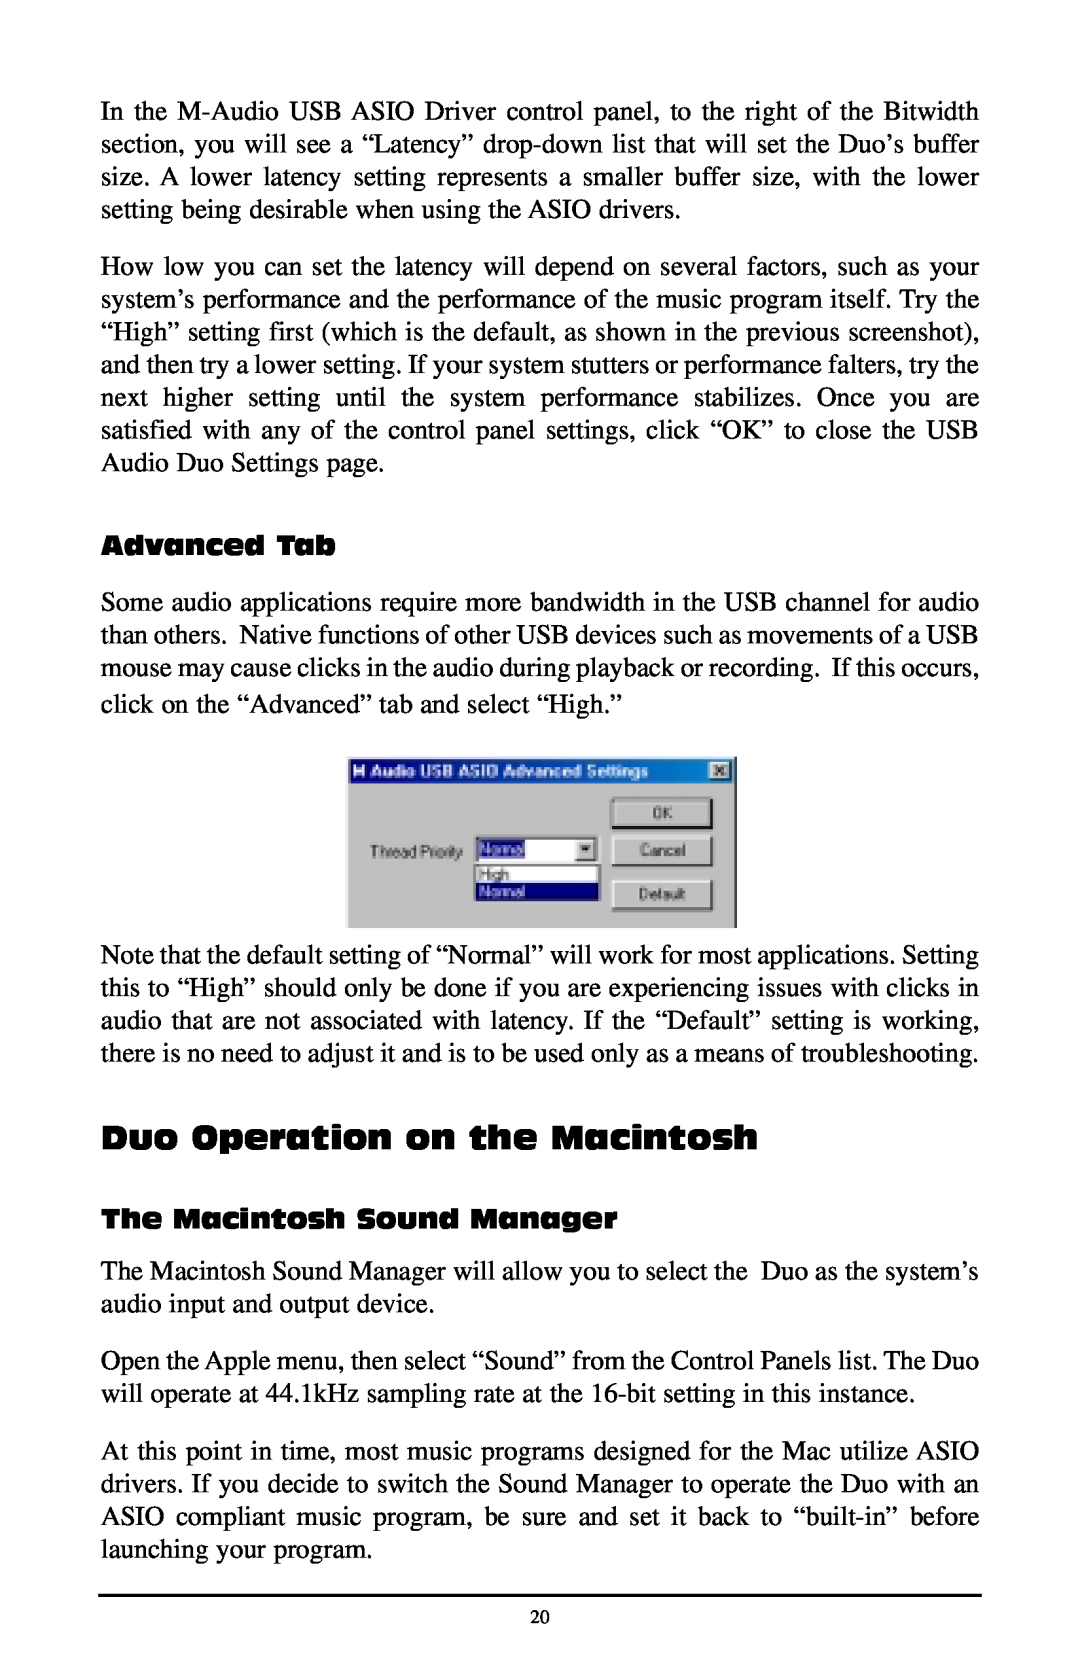 M-Audio quick start Duo Operation on the Macintosh, Advanced Tab, The Macintosh Sound Manager 